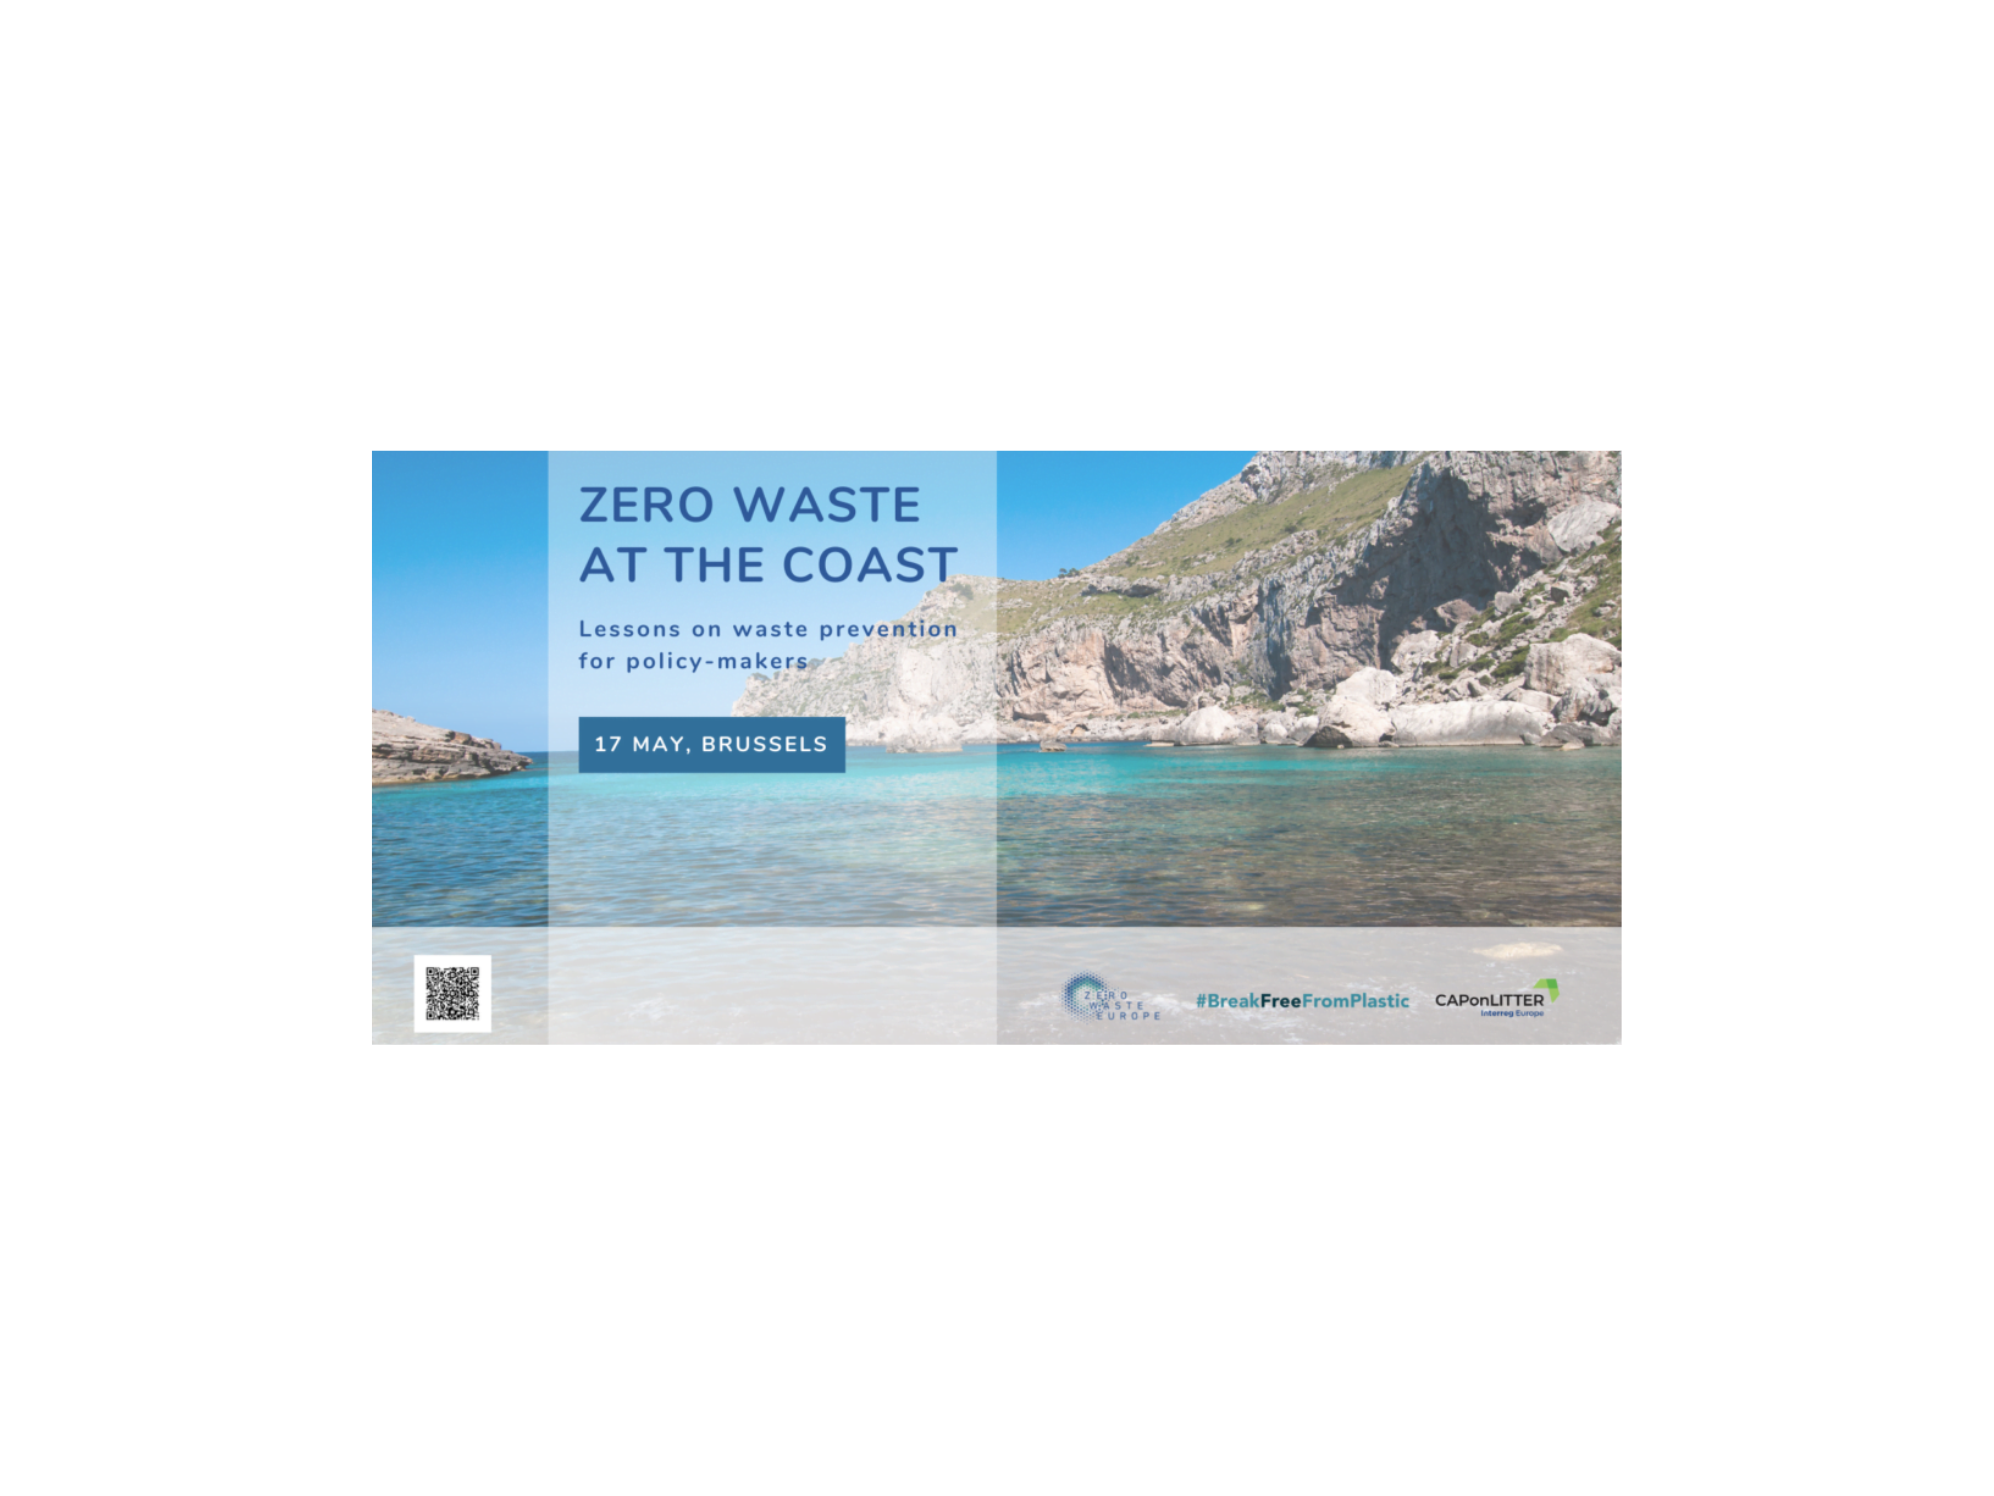 Conferencia Zero waste at the coast: Lessons on waste prevention for policy-makers